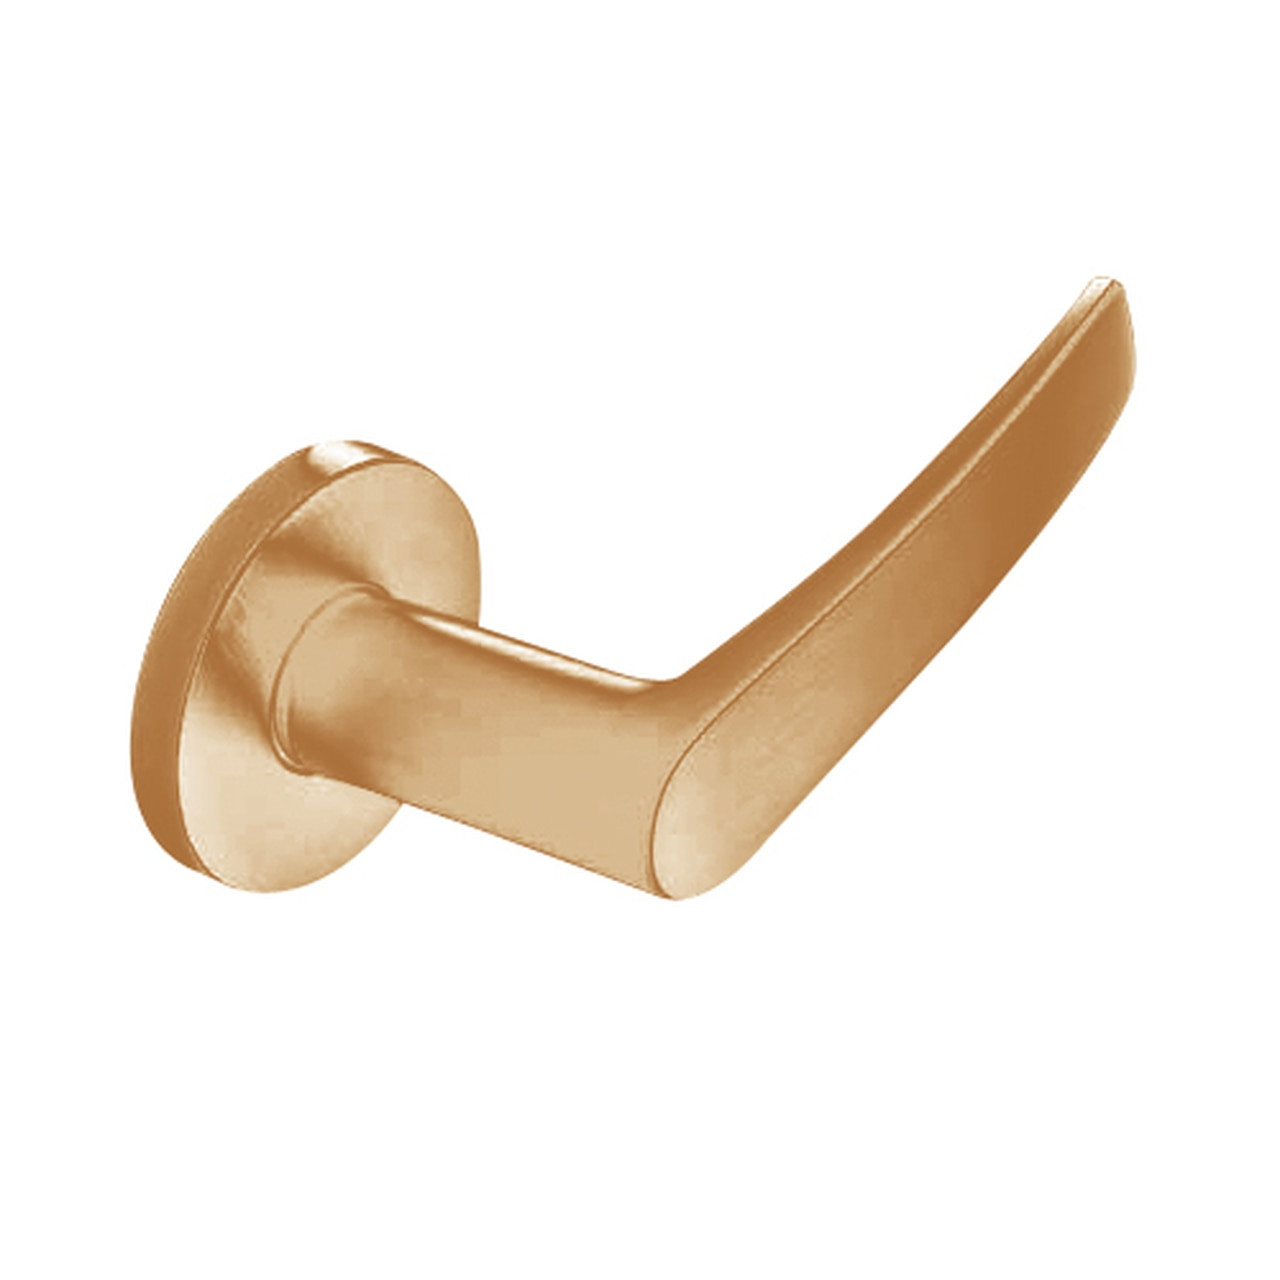 ML2054-ASF-612-M31 Corbin Russwin ML2000 Series Mortise Entrance Trim Pack with Armstrong Lever in Satin Bronze